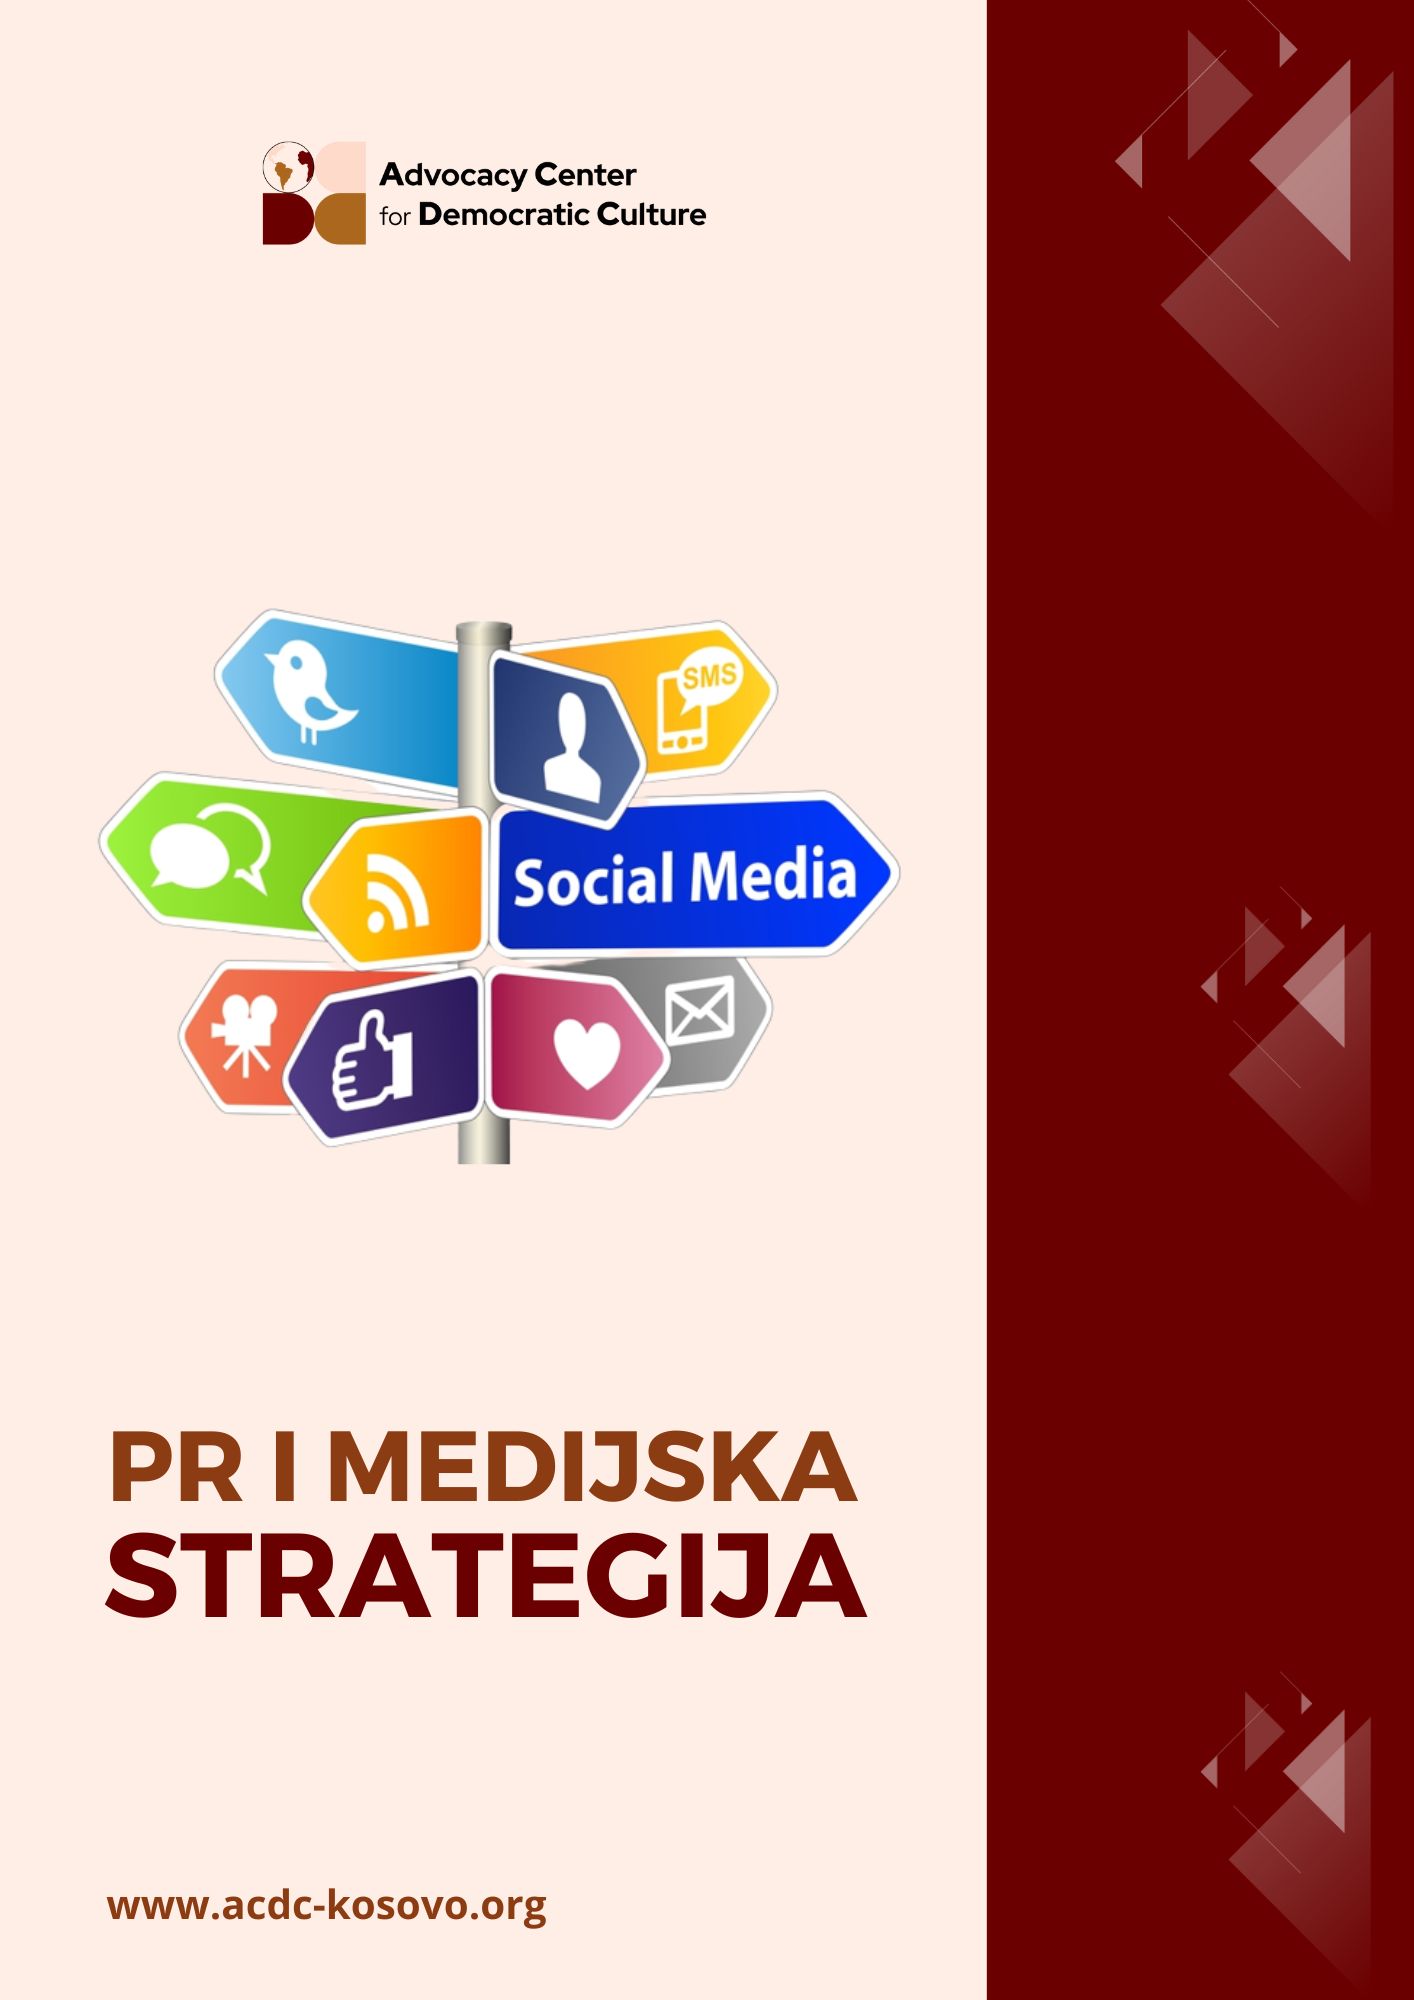 PR and Media Strategy